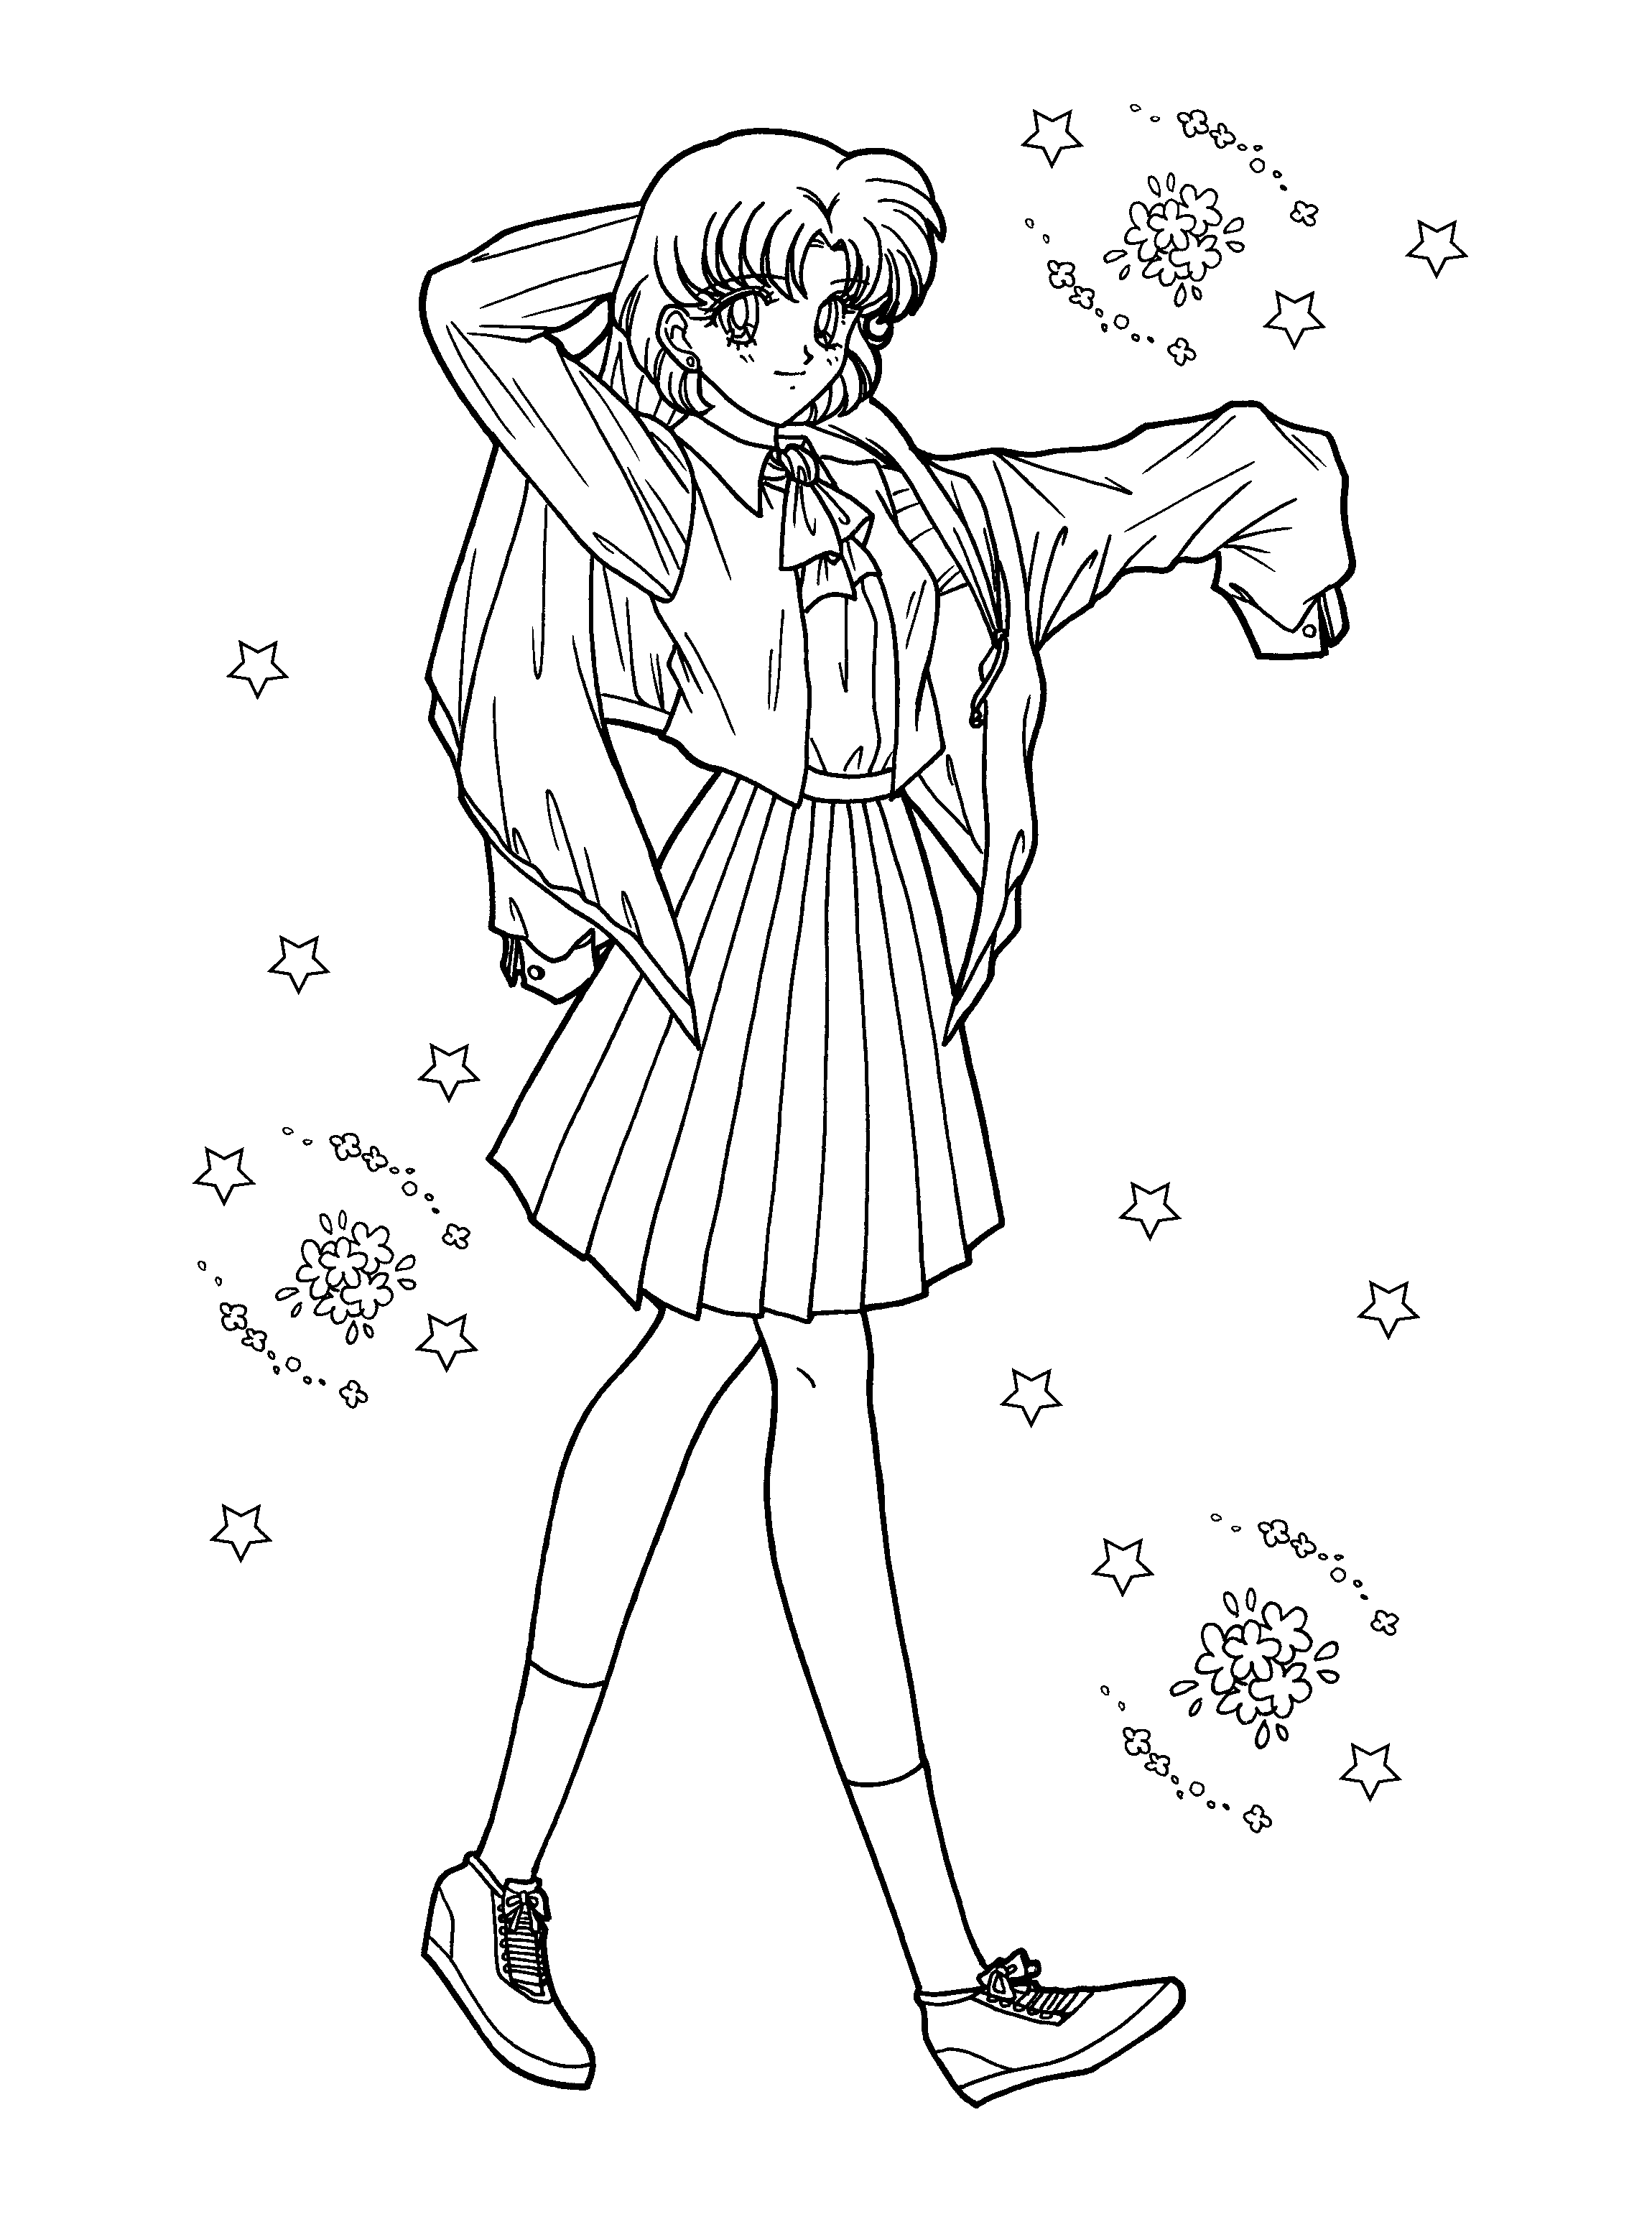 animated-coloring-pages-sailor-moon-image-0009